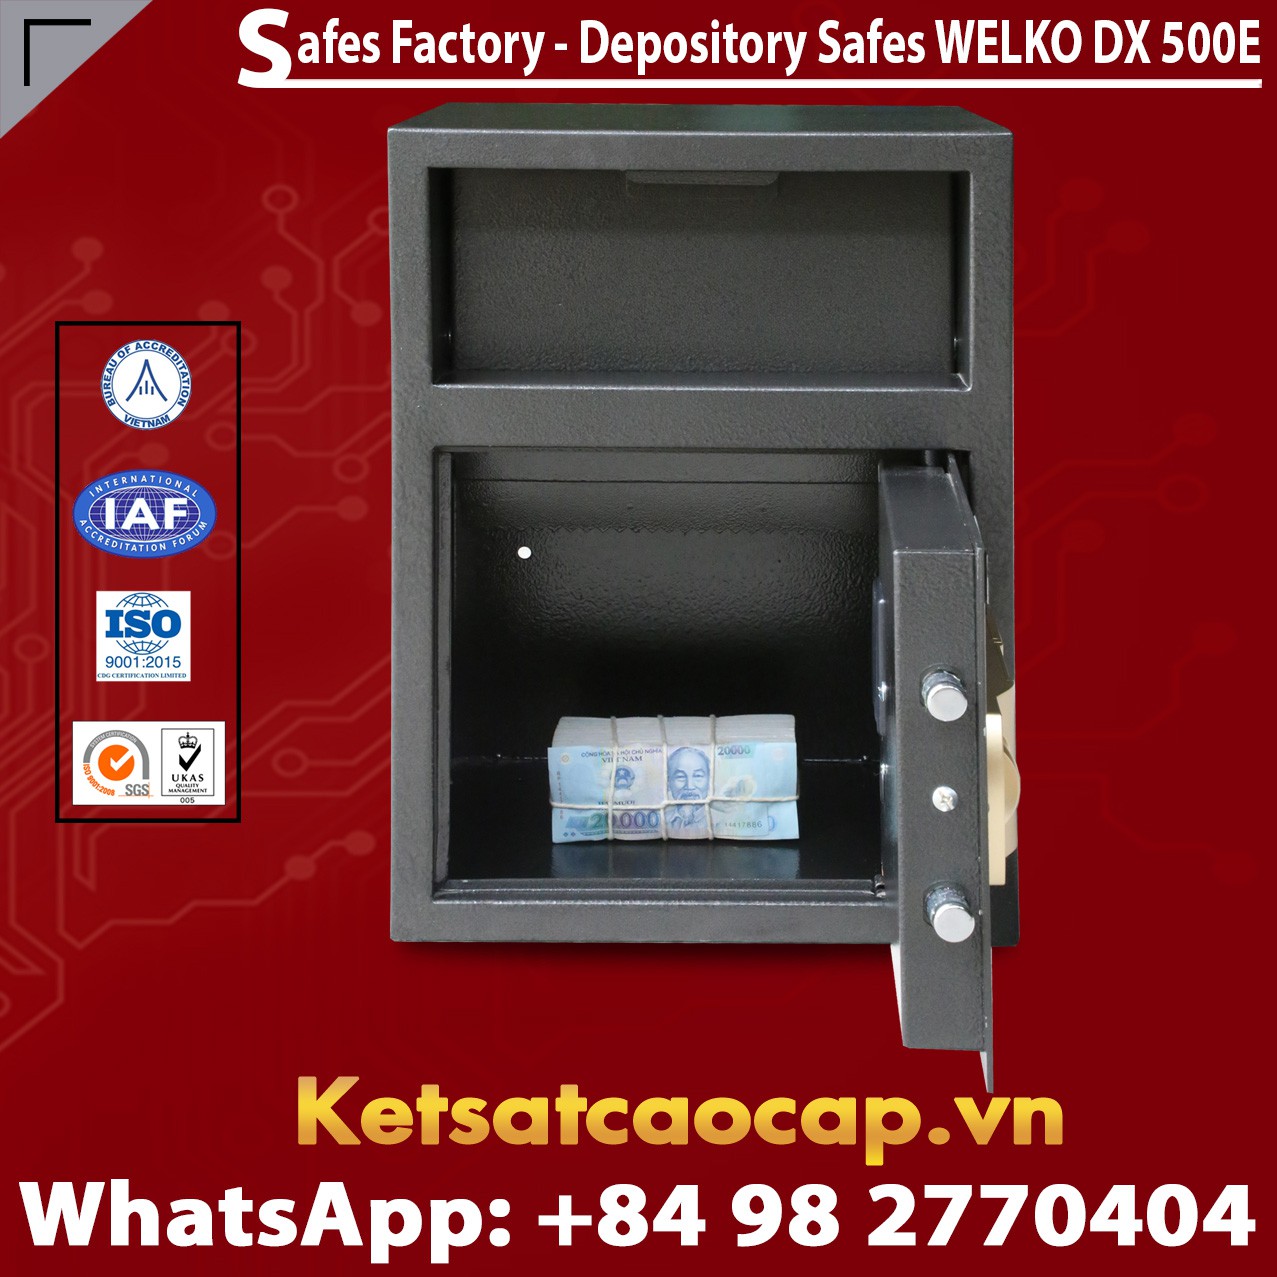 Depository Safe Suppliers and Exporters giá rẻ